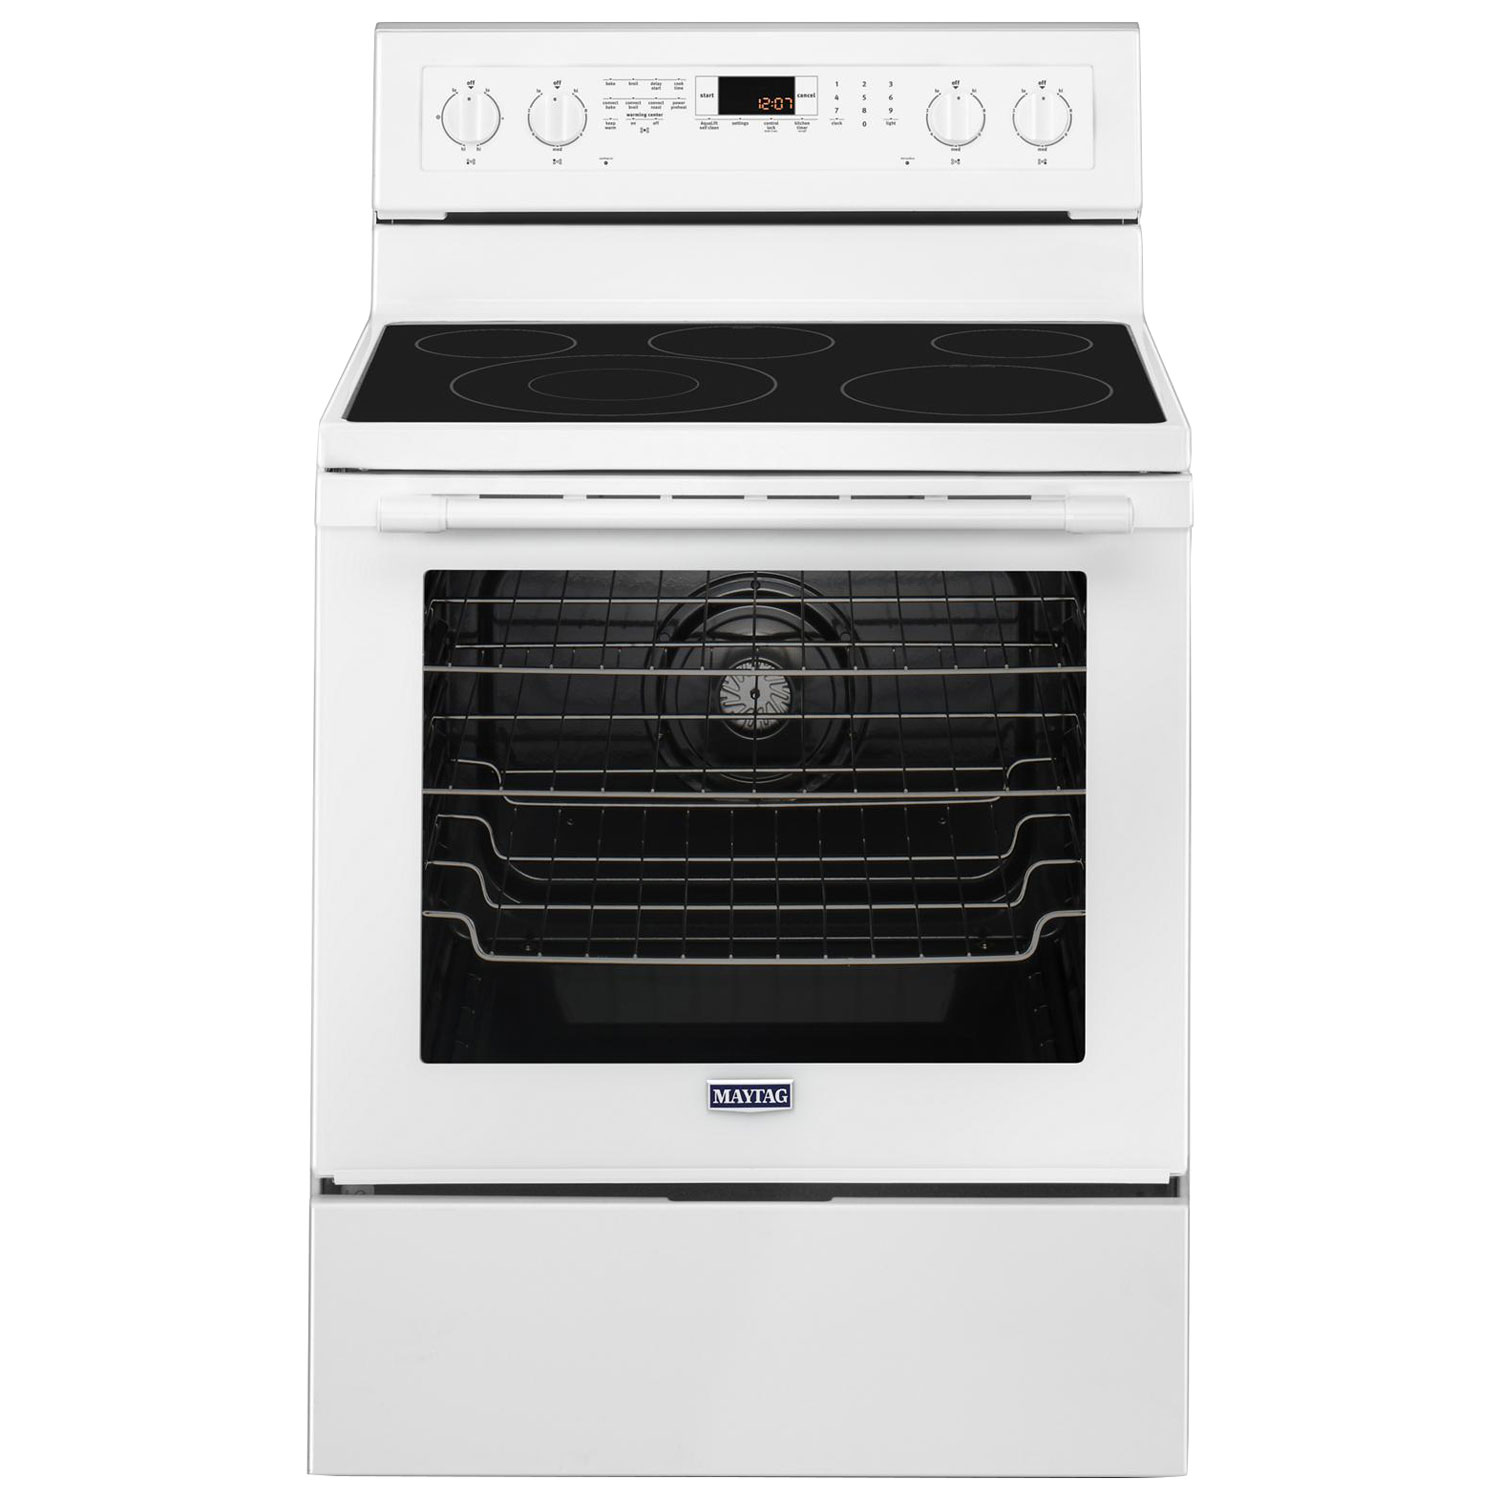 Maytag 30" 6.4 Cu. Ft. True Convection 5-Element Freestanding Electric Range (YMER8800FW) - White